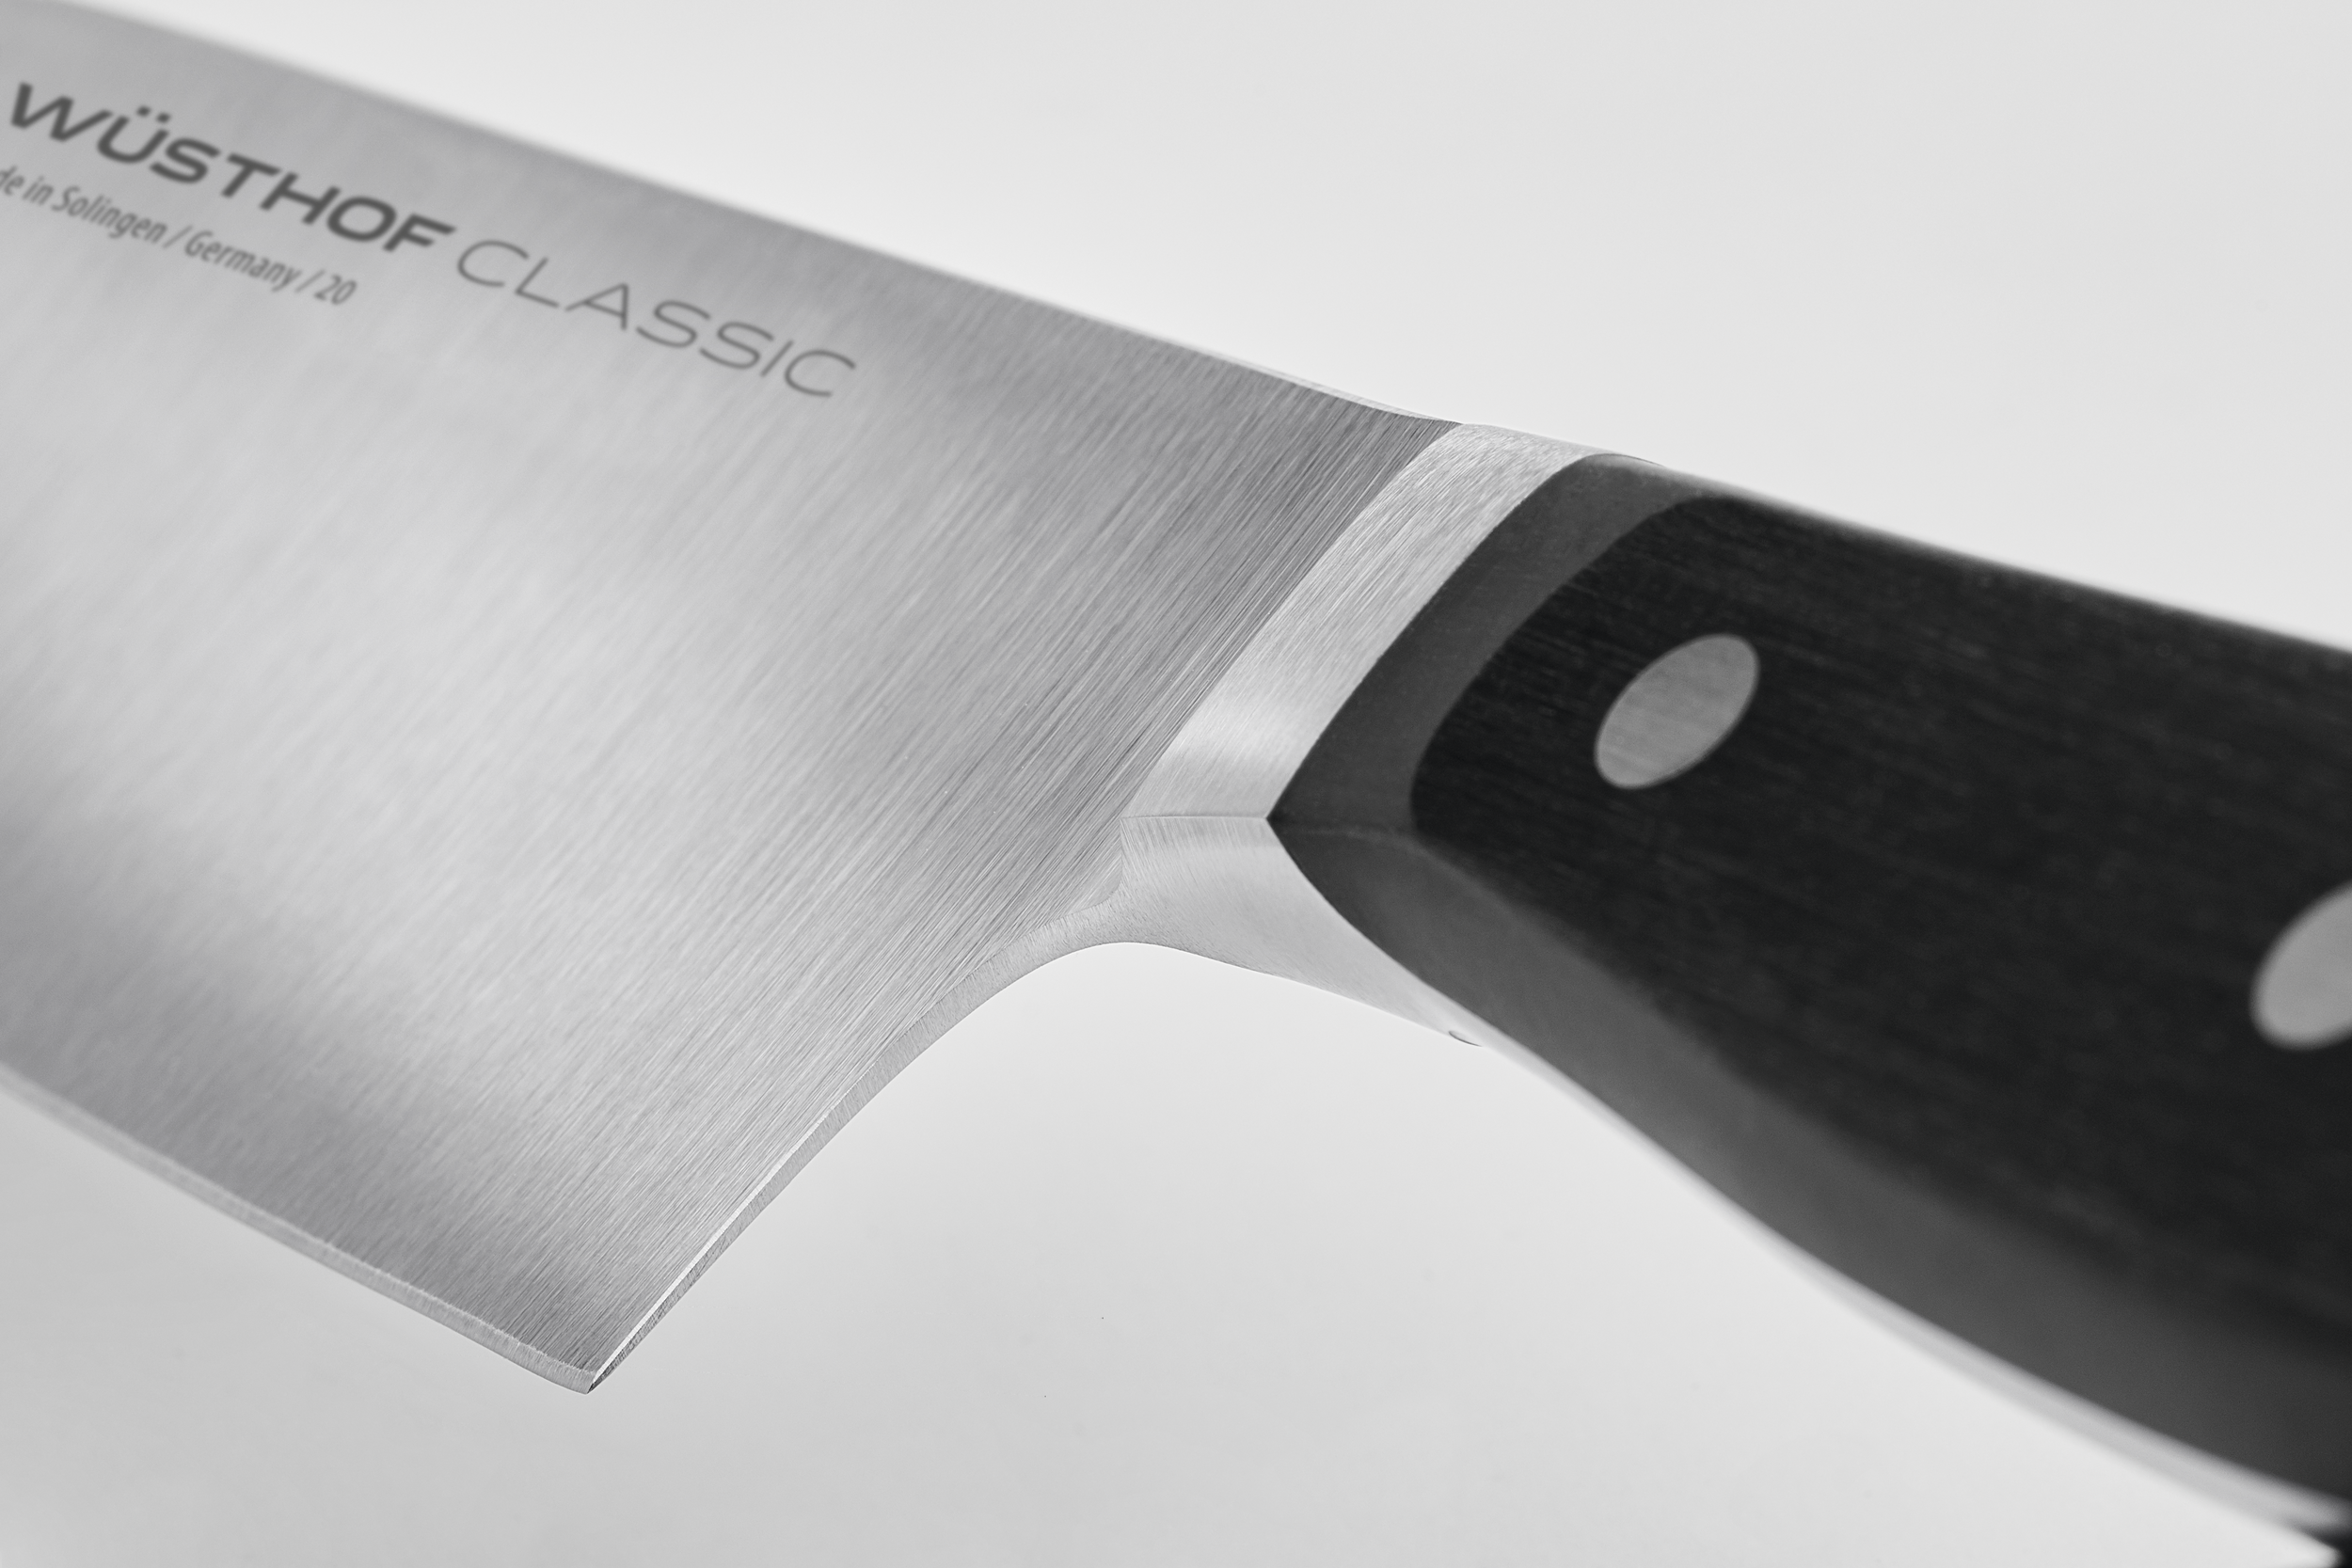 Wusthof Classic 6 Cook's Knife - Mills & Co